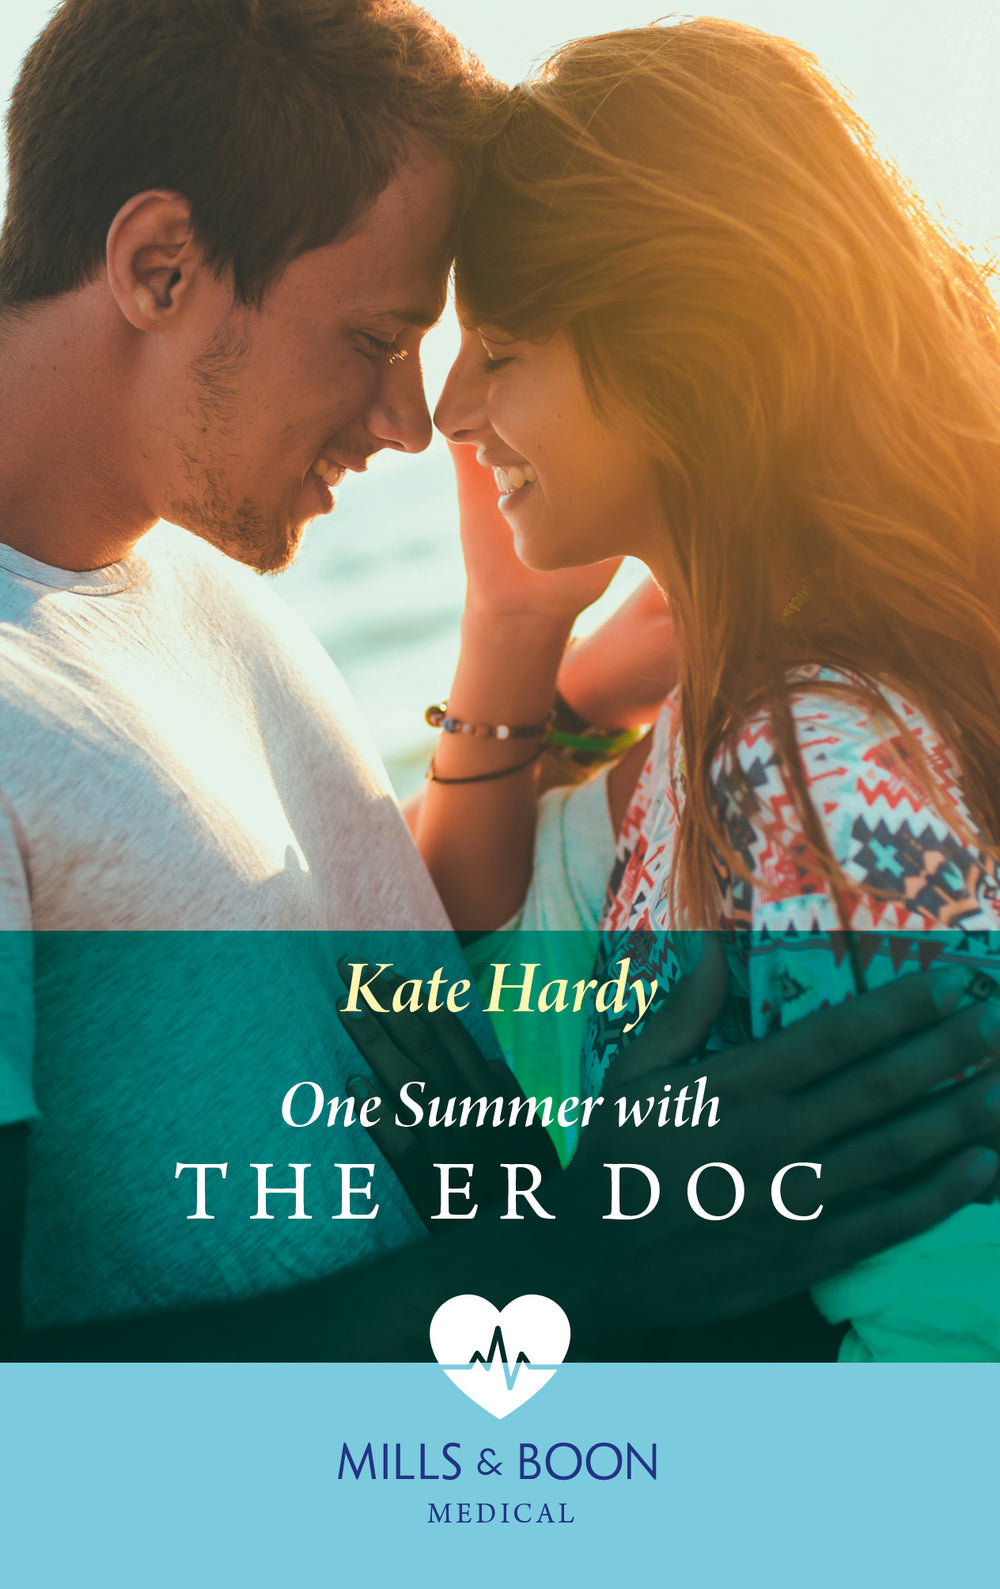 One Summer with the ER Doc - Chapter 1